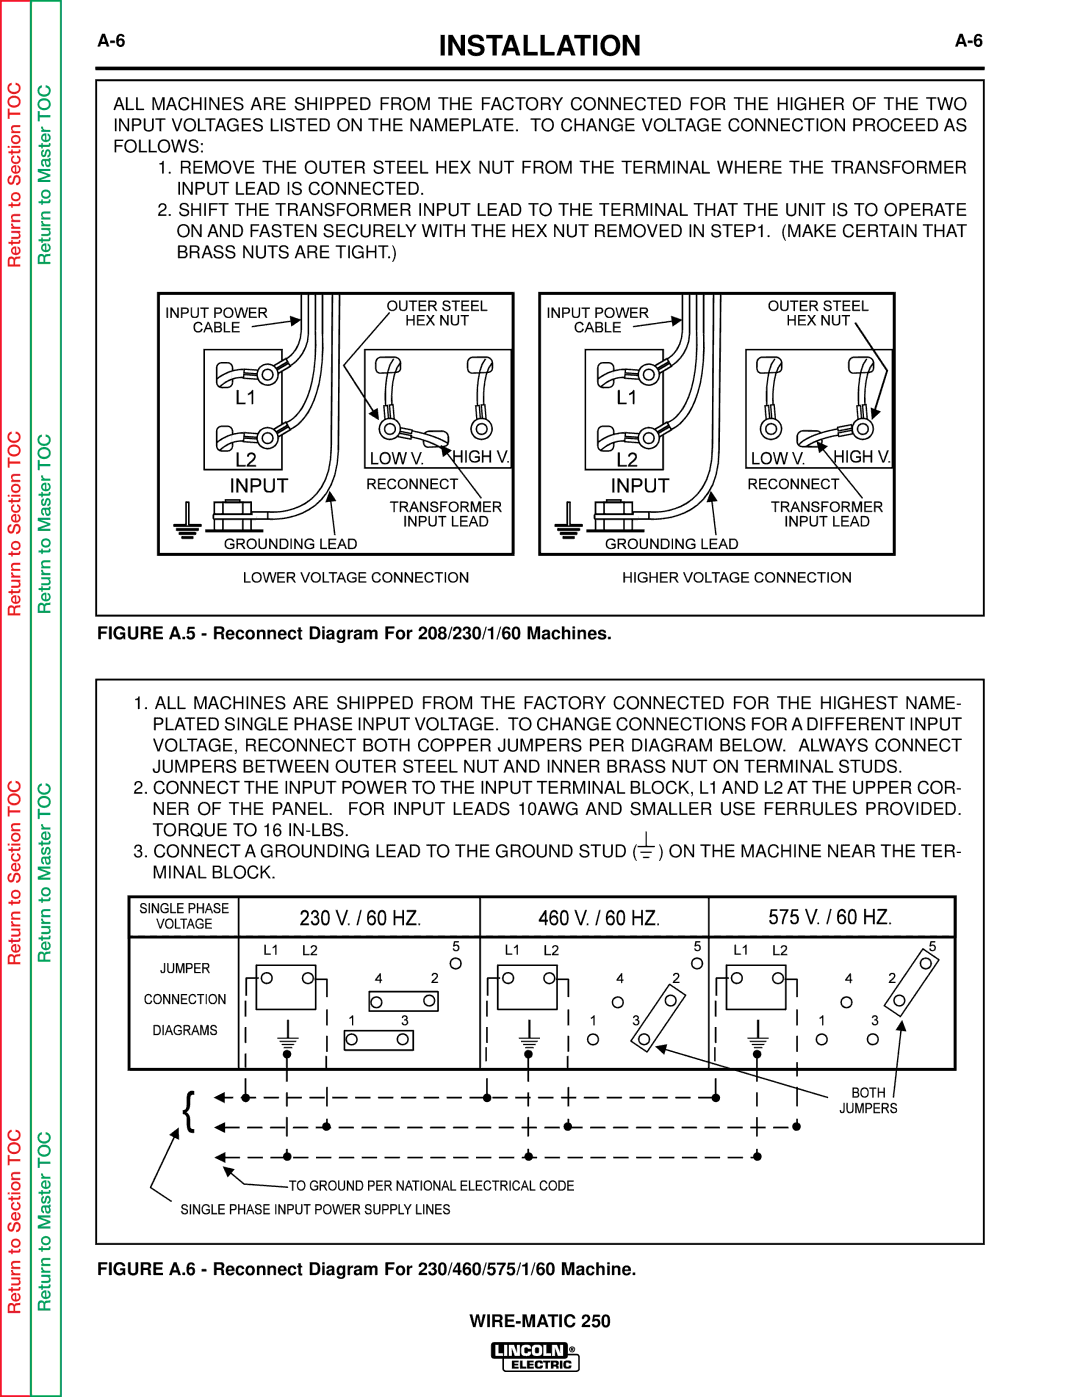 Lincoln Electric SVM 117-A service manual Figure A.5 Reconnect Diagram For 208/230/1/60 Machines 